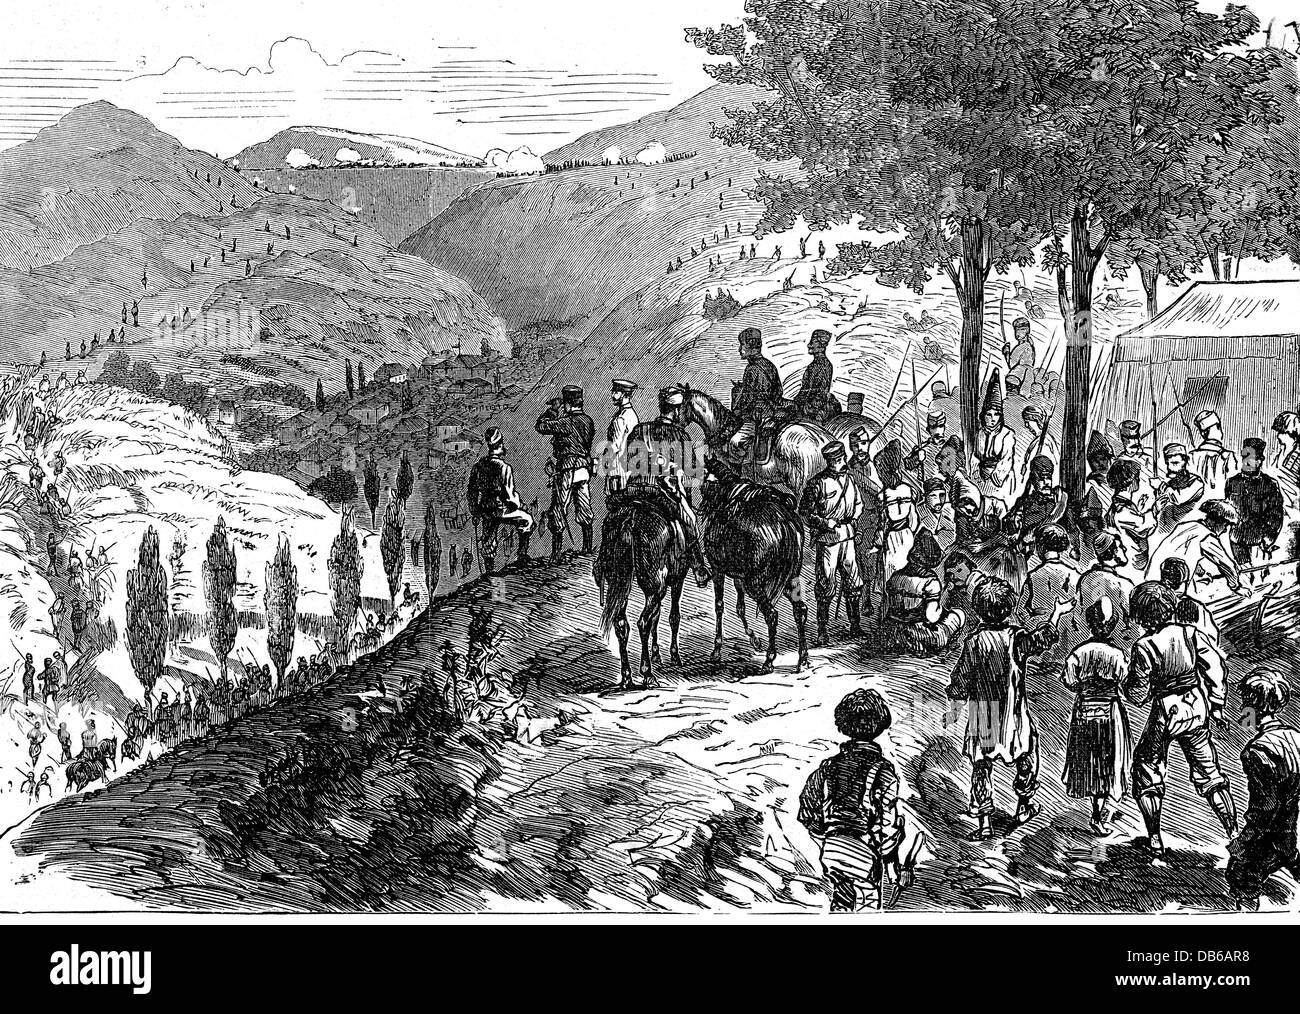 events, First Serbo-Turkish War 1876, Battle of Veliki Izvor, 18.7.1876, general Chernayev with his staff, right: captured Circassians, contemporary wood engraving, prisoners of war, POW, POWs, Serbs, Bulgarians, Kingdom of Serbia, Balkans, Balkan Crisis, Oriental Crisis, Ottoman Empire, Serbo - Turkish War, 19th century, historic, historical, people, Additional-Rights-Clearences-Not Available Stock Photo